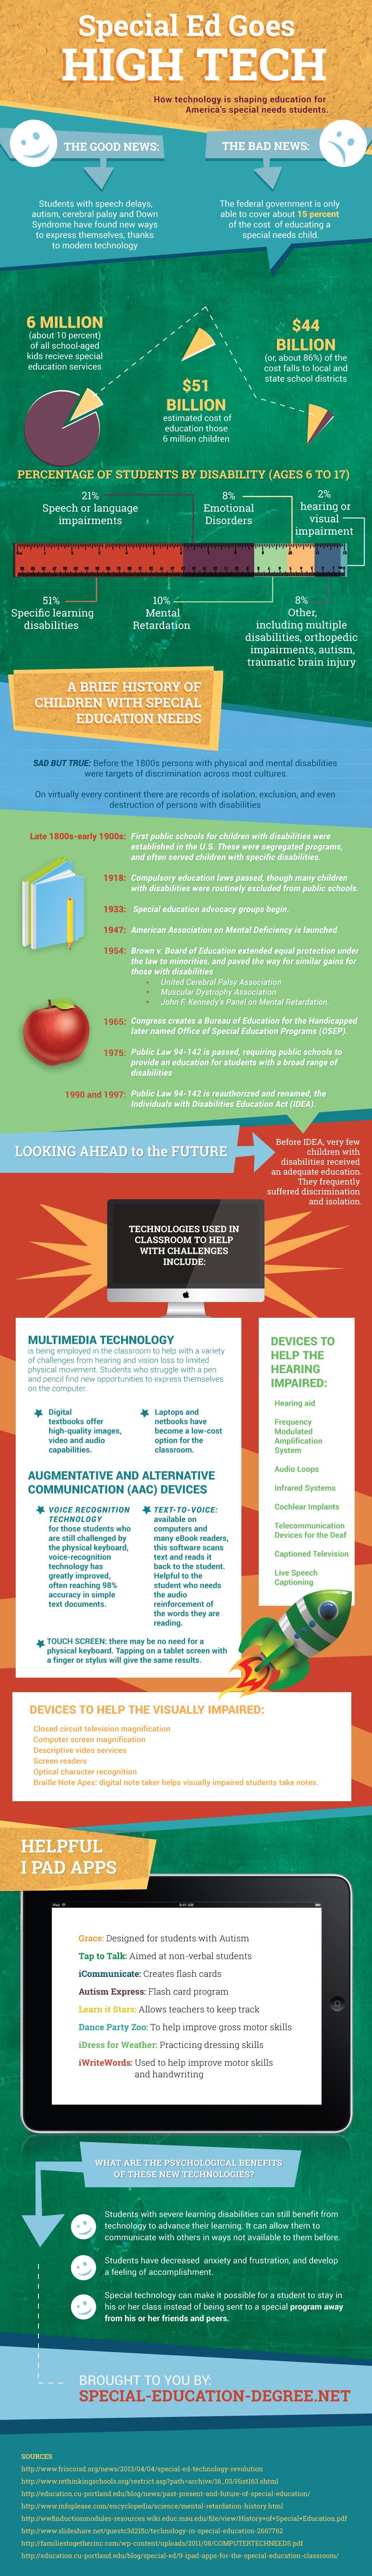 Special Ed Goes High Tech Infographic